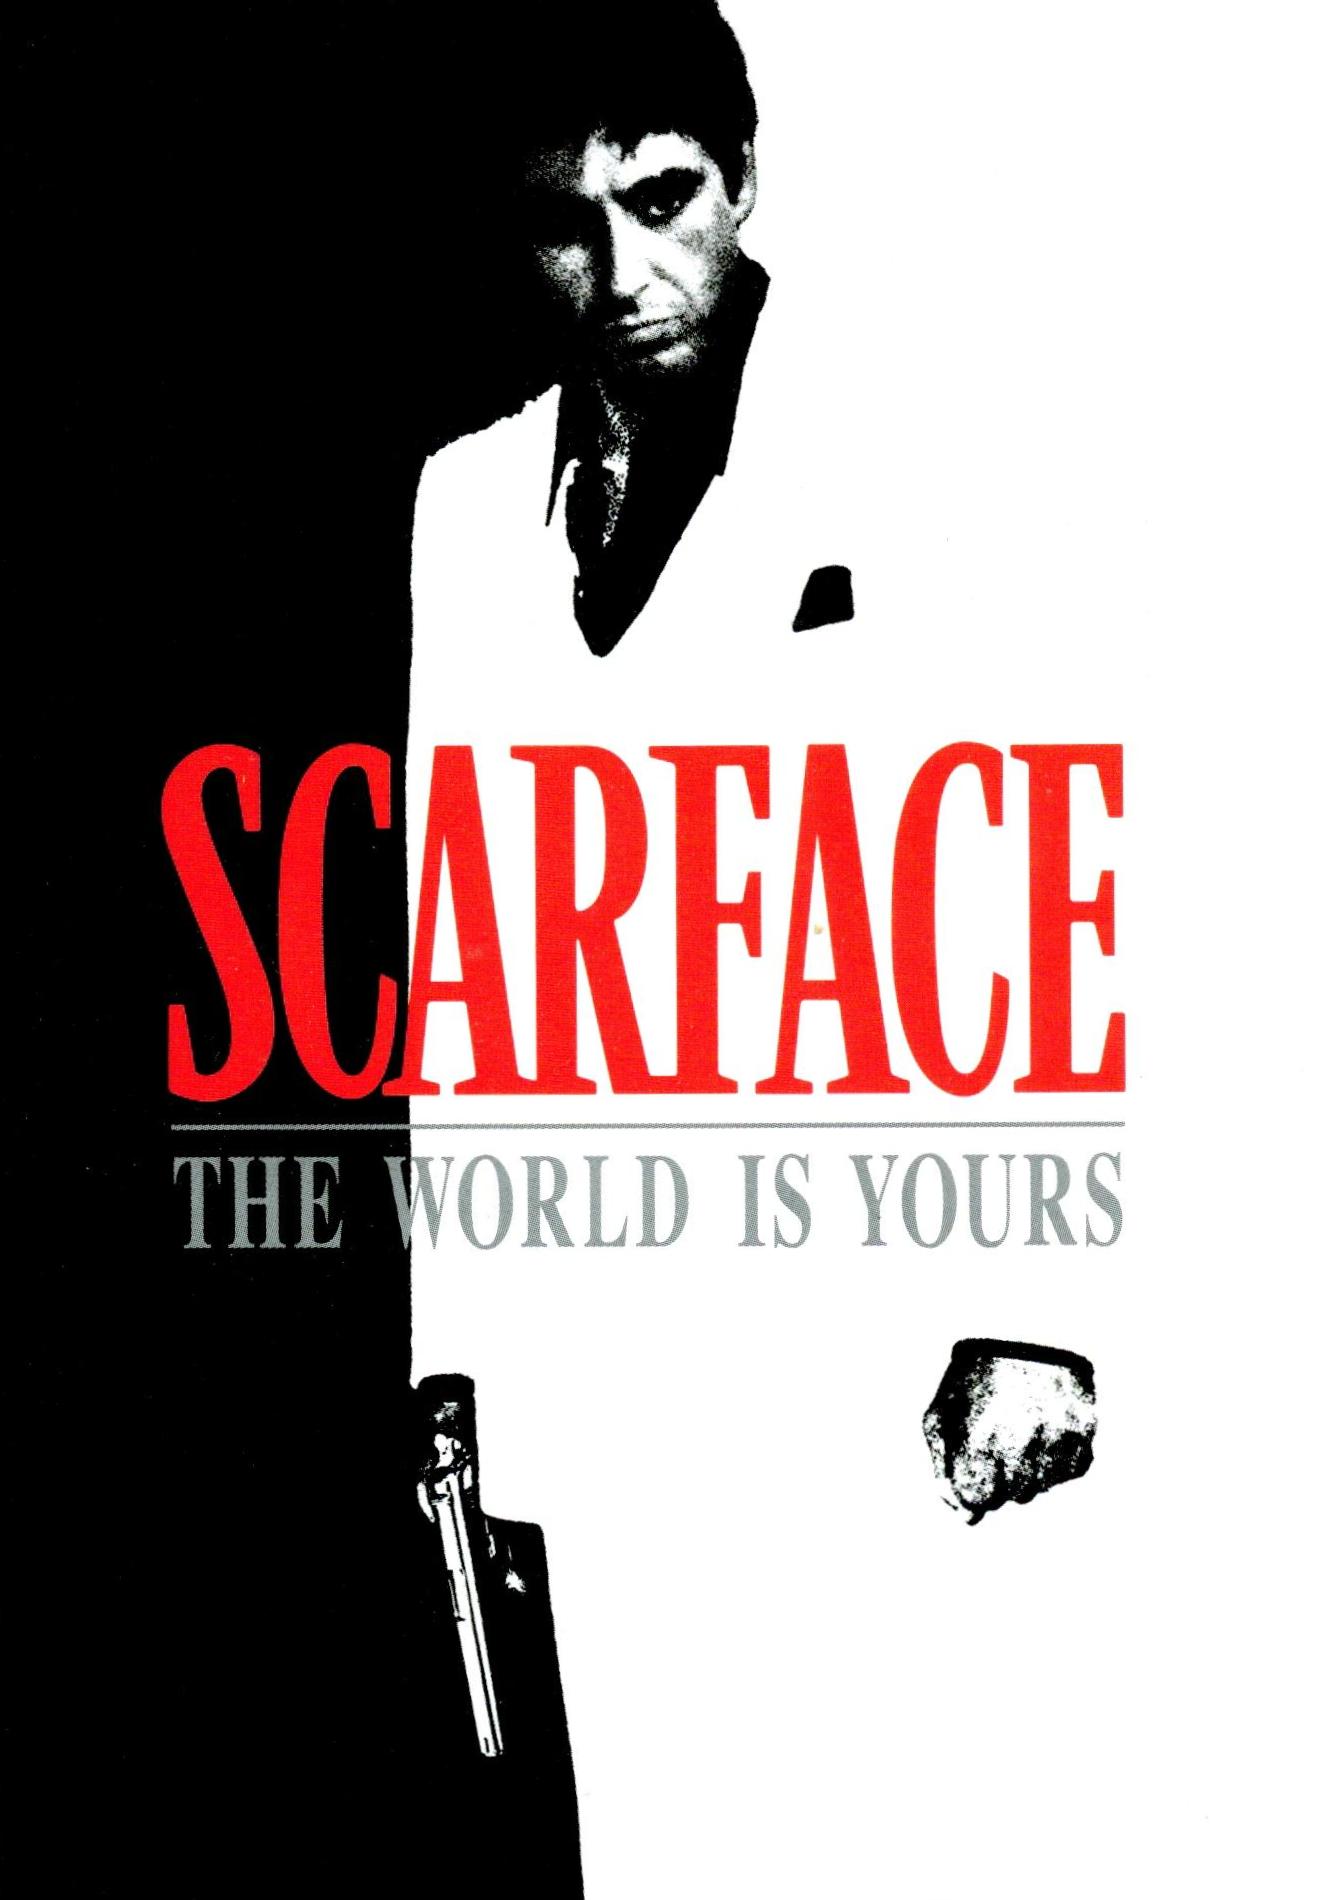 Scarface Painting Wallpapers Top Free Scarface Painting Backgrounds Wallpaperaccess